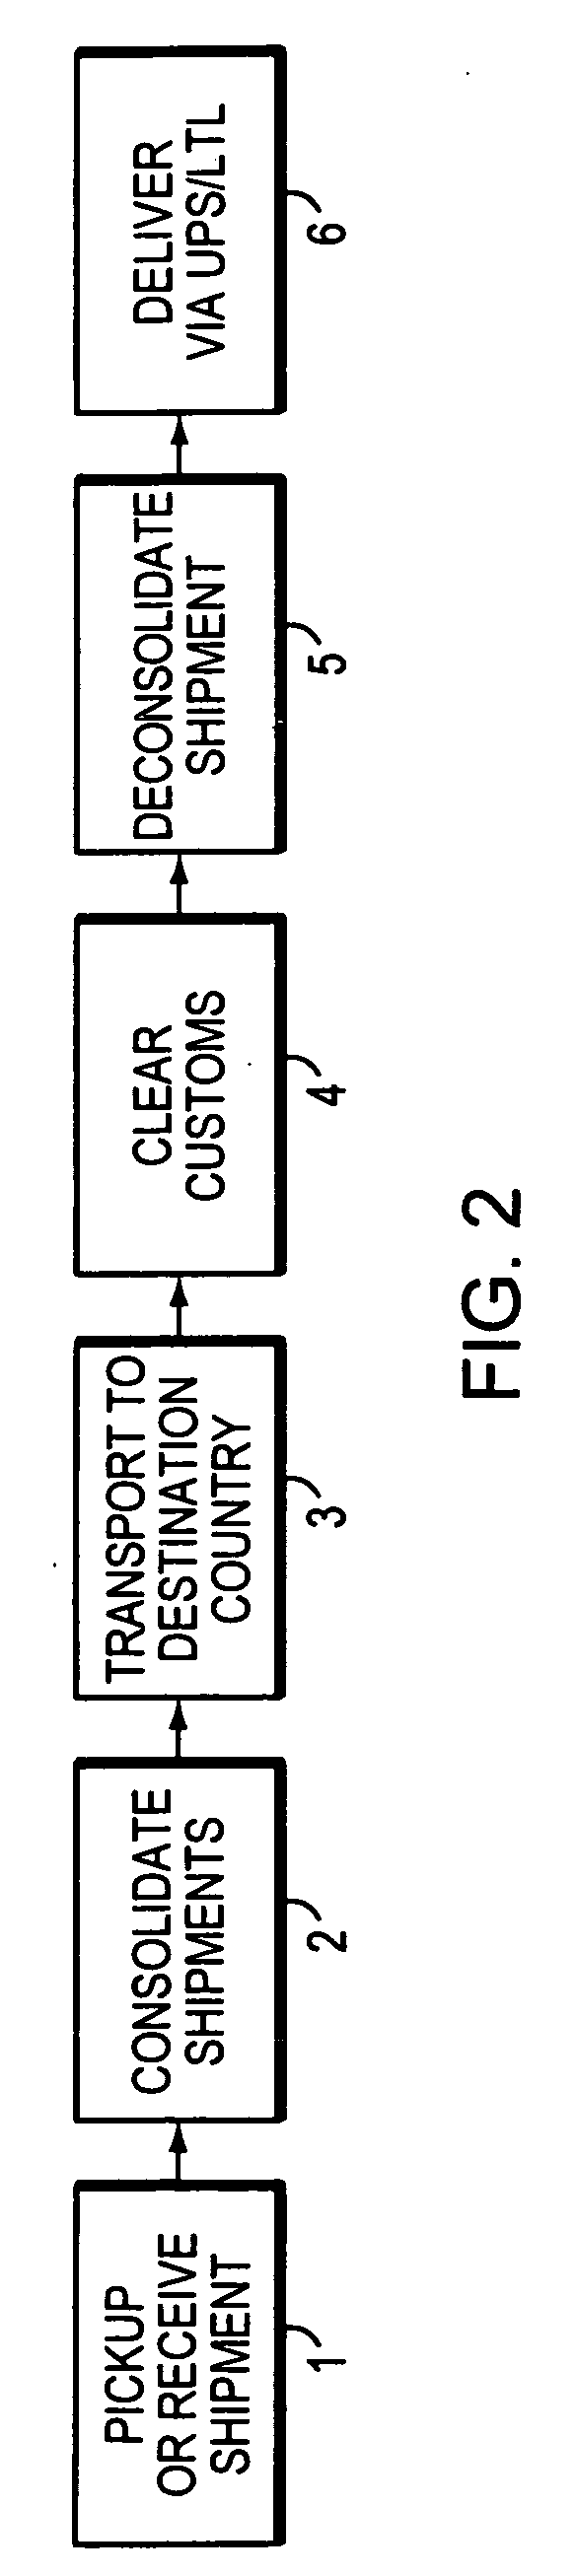 Systems and methods for integrated global shipping and visibility